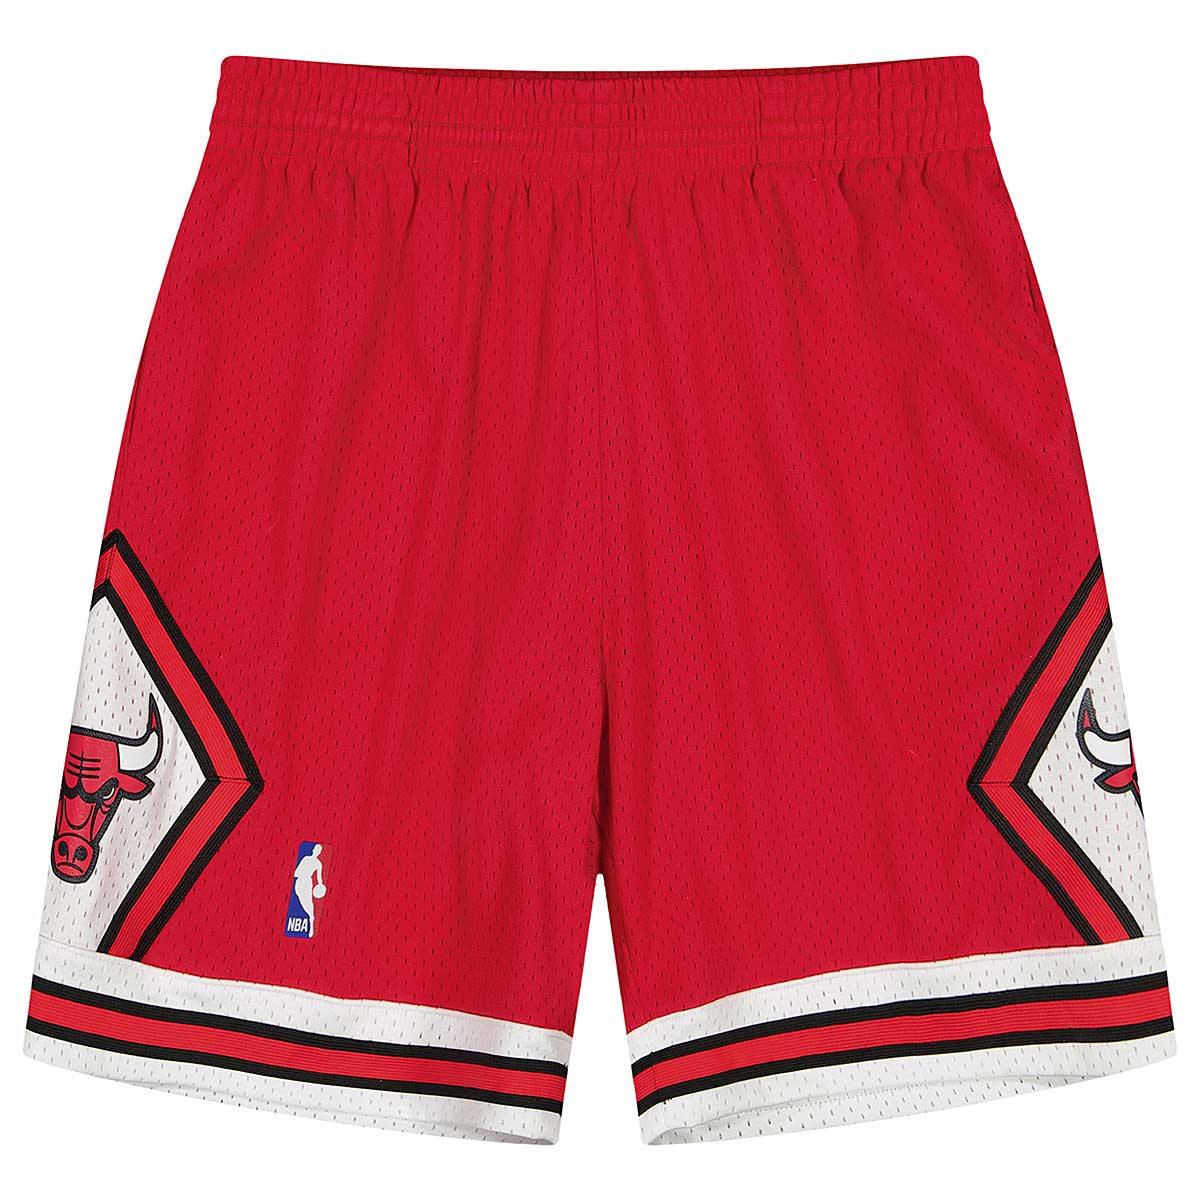 Image of Mitchell And Ness NBA Chicago Bulls 1997-98 Swingman Shorts, Scarlet